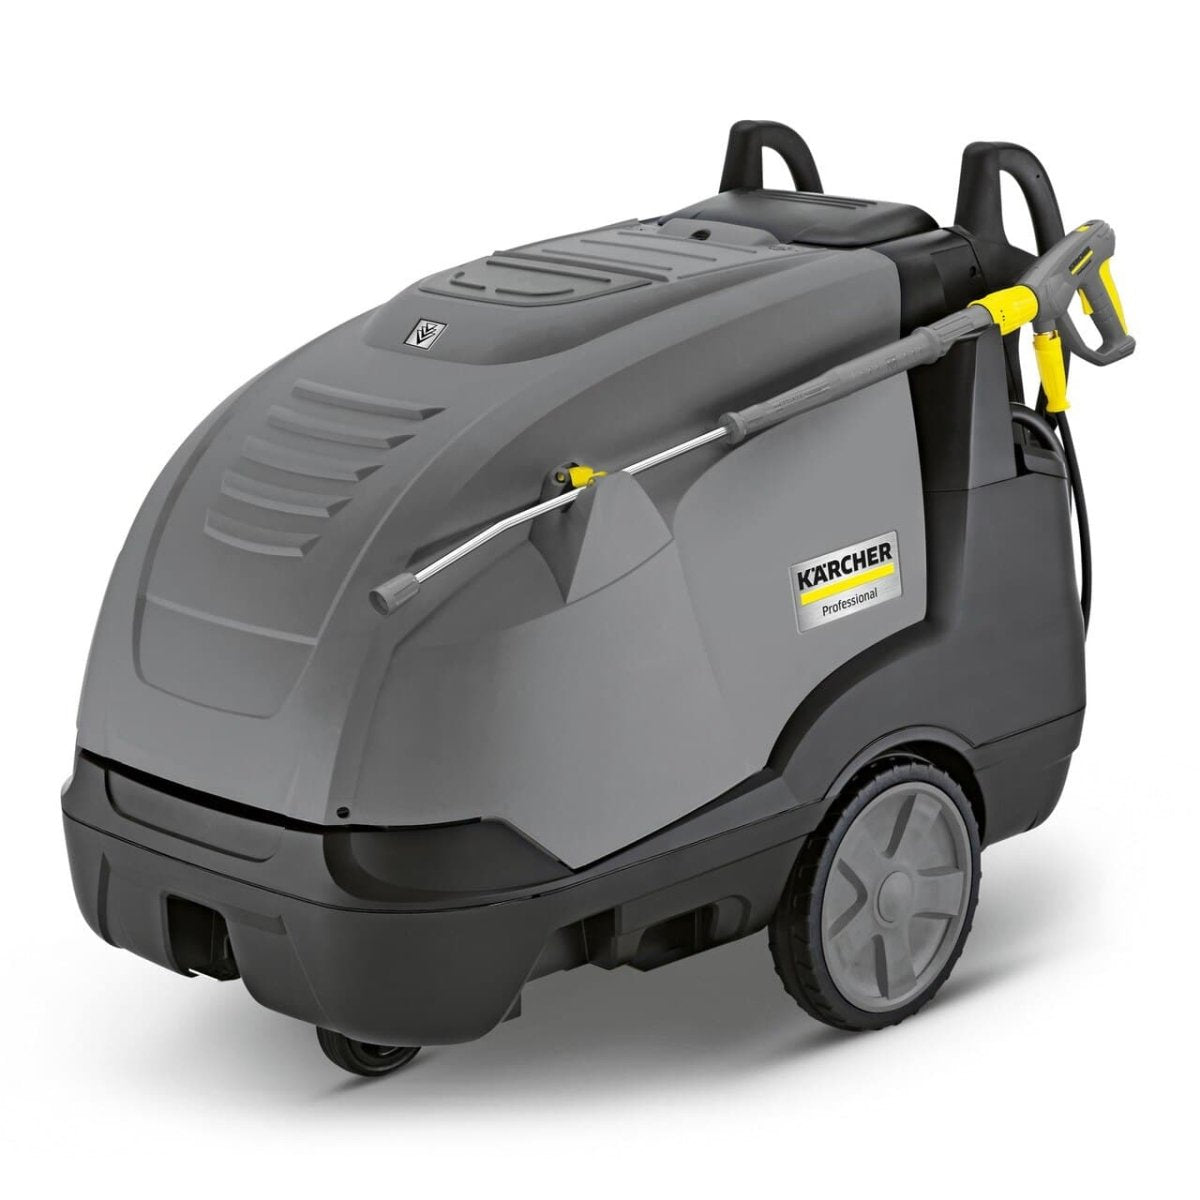 Electrically Heated, Hot Water Pressure Washer, Pressure Cleaner